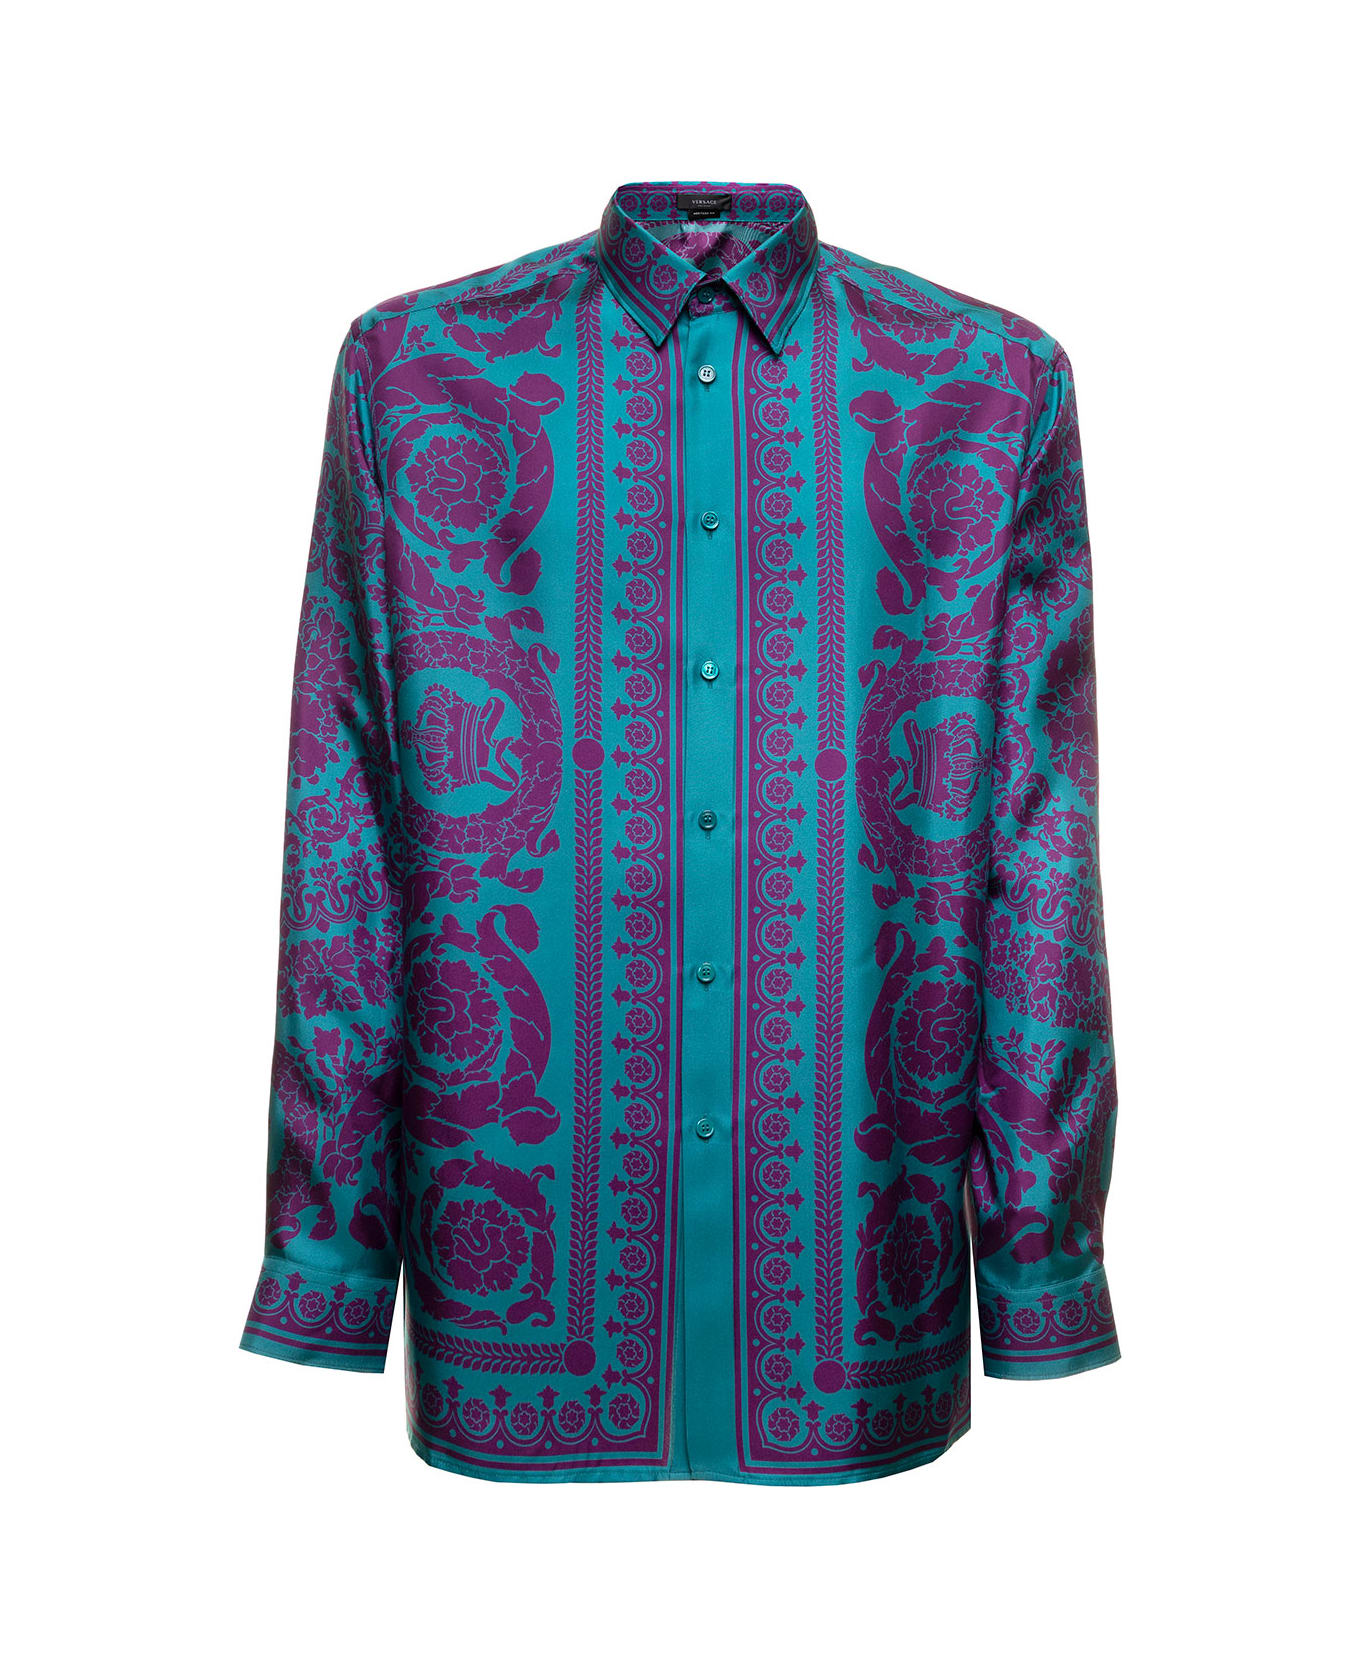 Versace Purple And Light Blue Shirt In Silk Twill With Barocco Pattern Versace Man - Violet